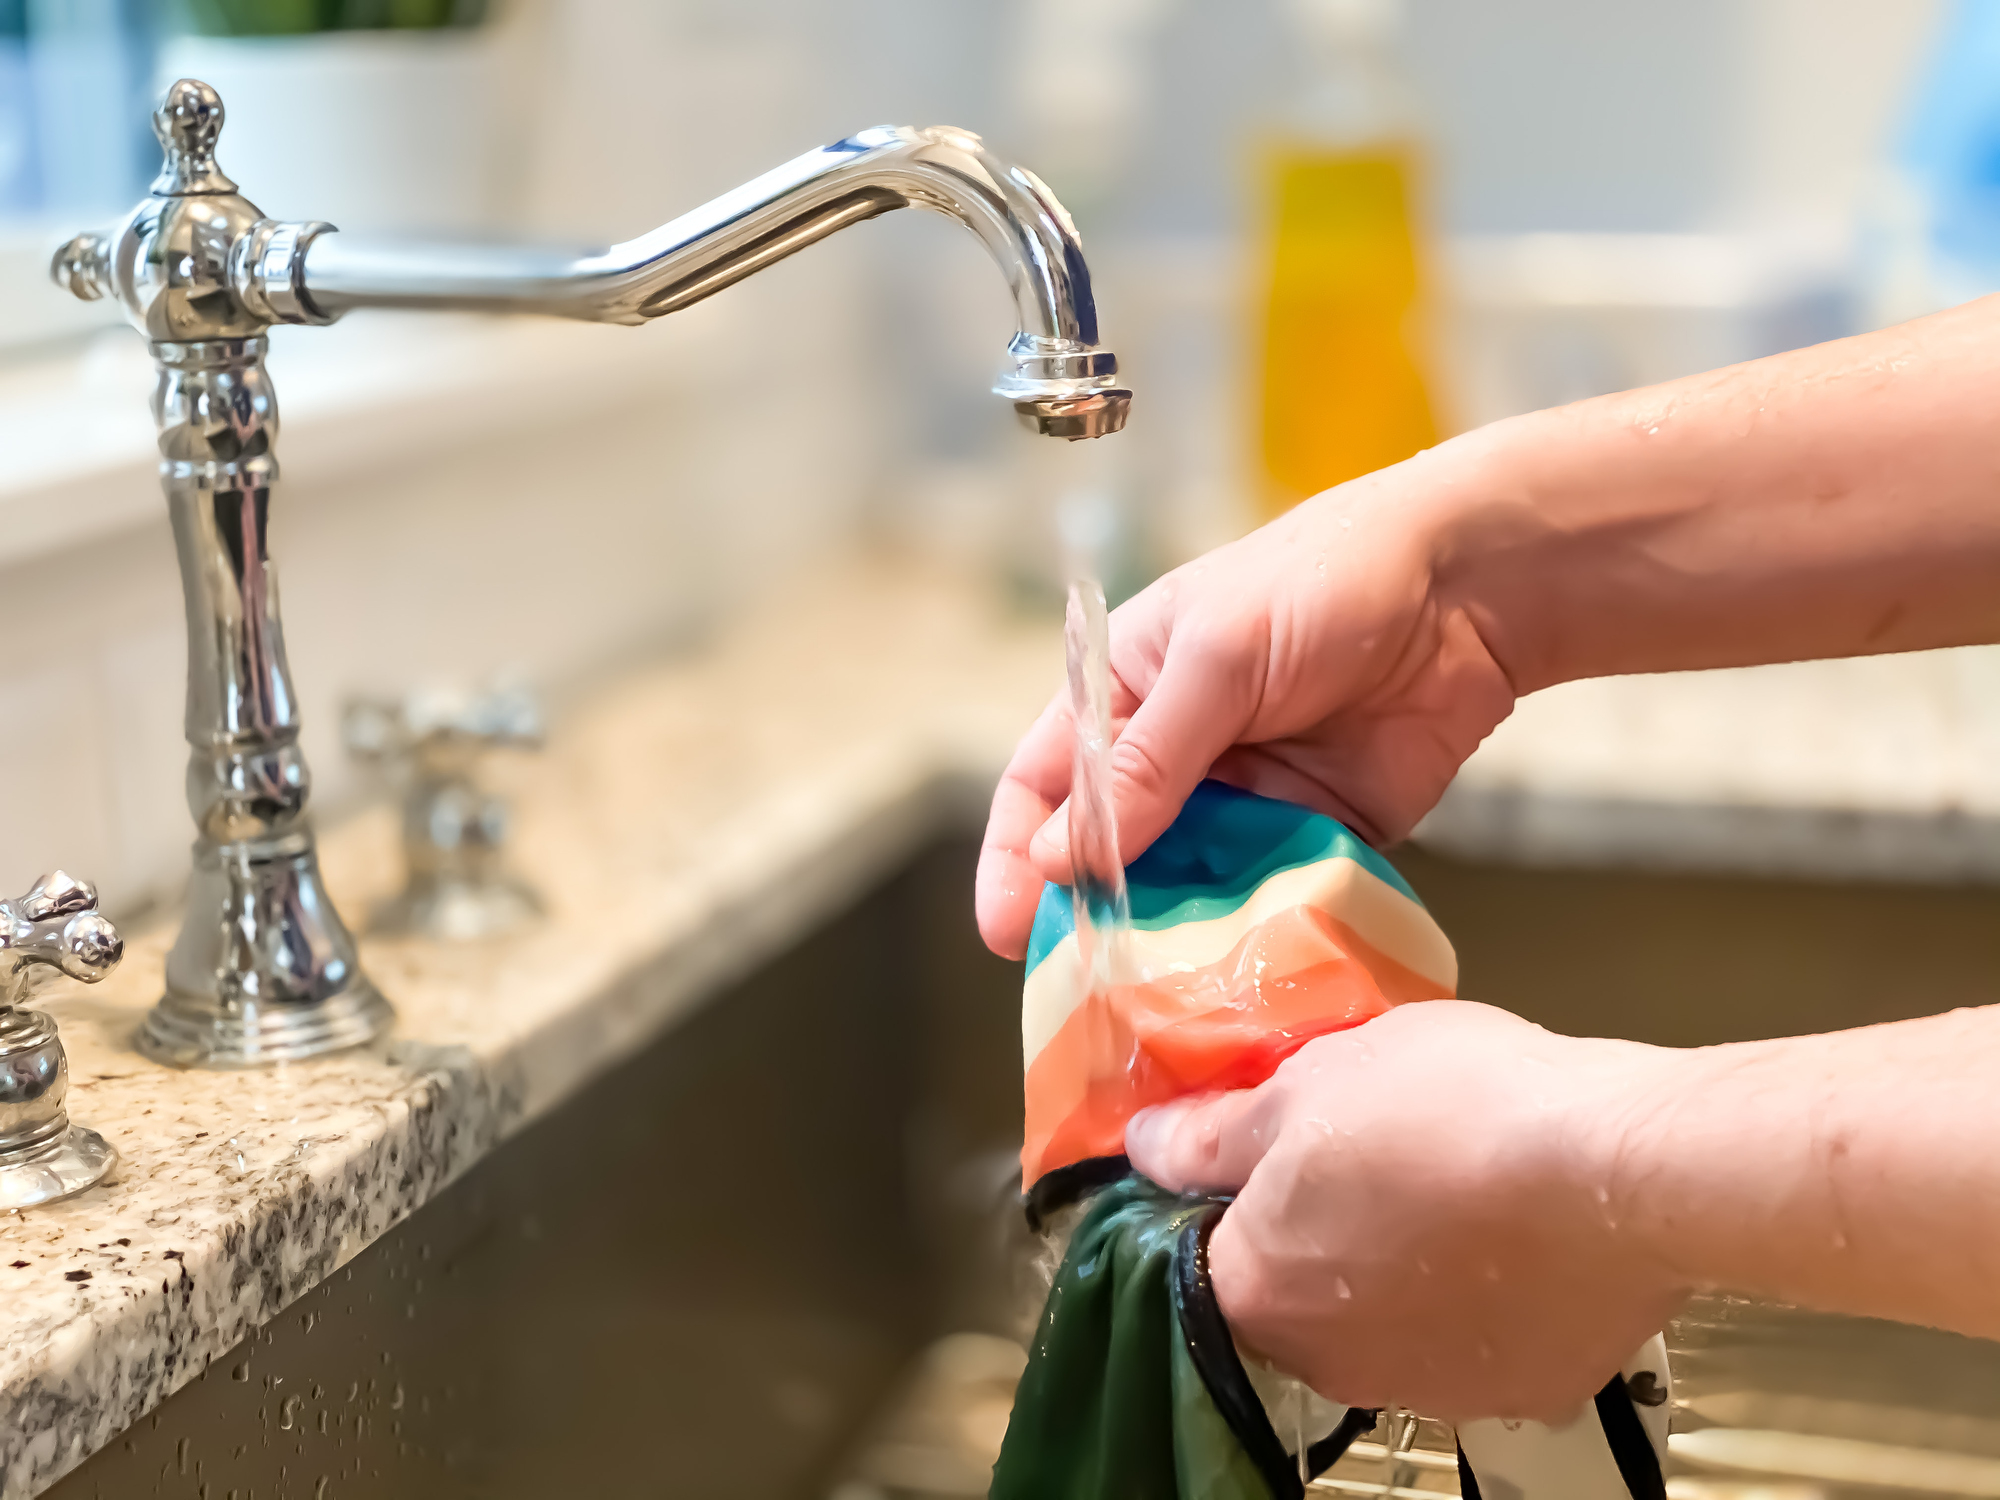 A person washes a multicolored bowl under a kitchen sink faucet